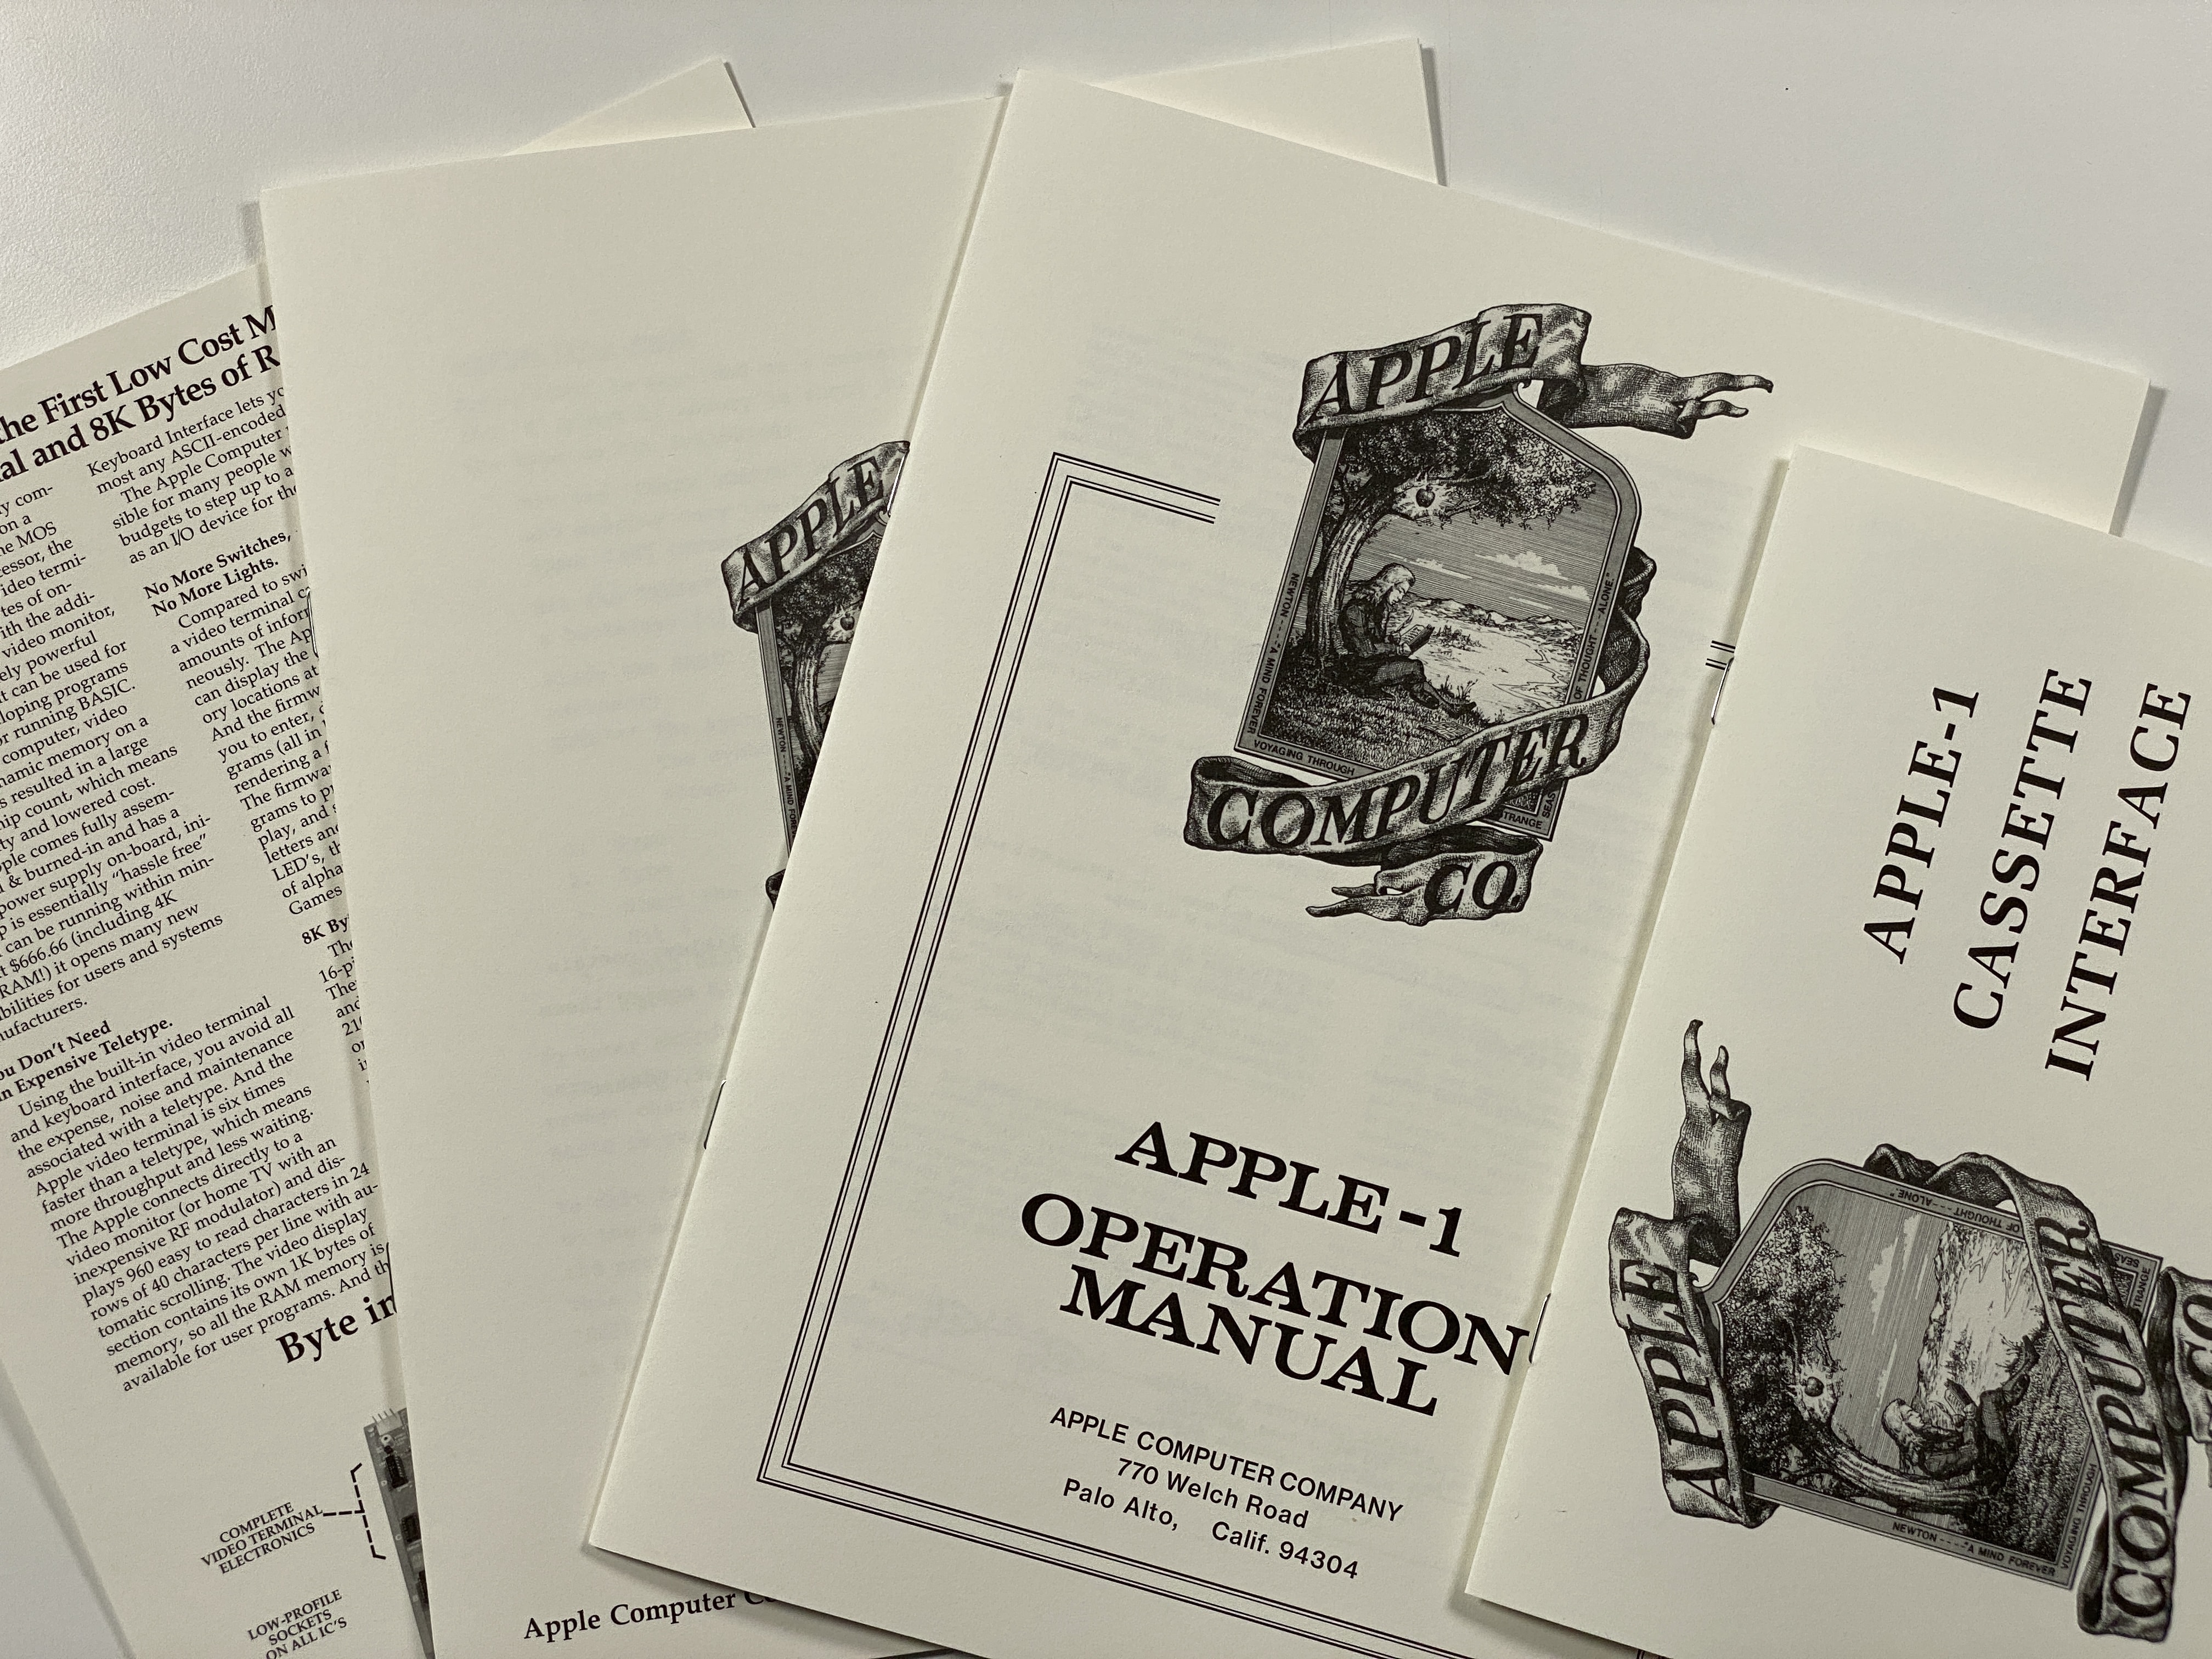 Behold the set of Apple-1 Operation manuals, including a cassette card.